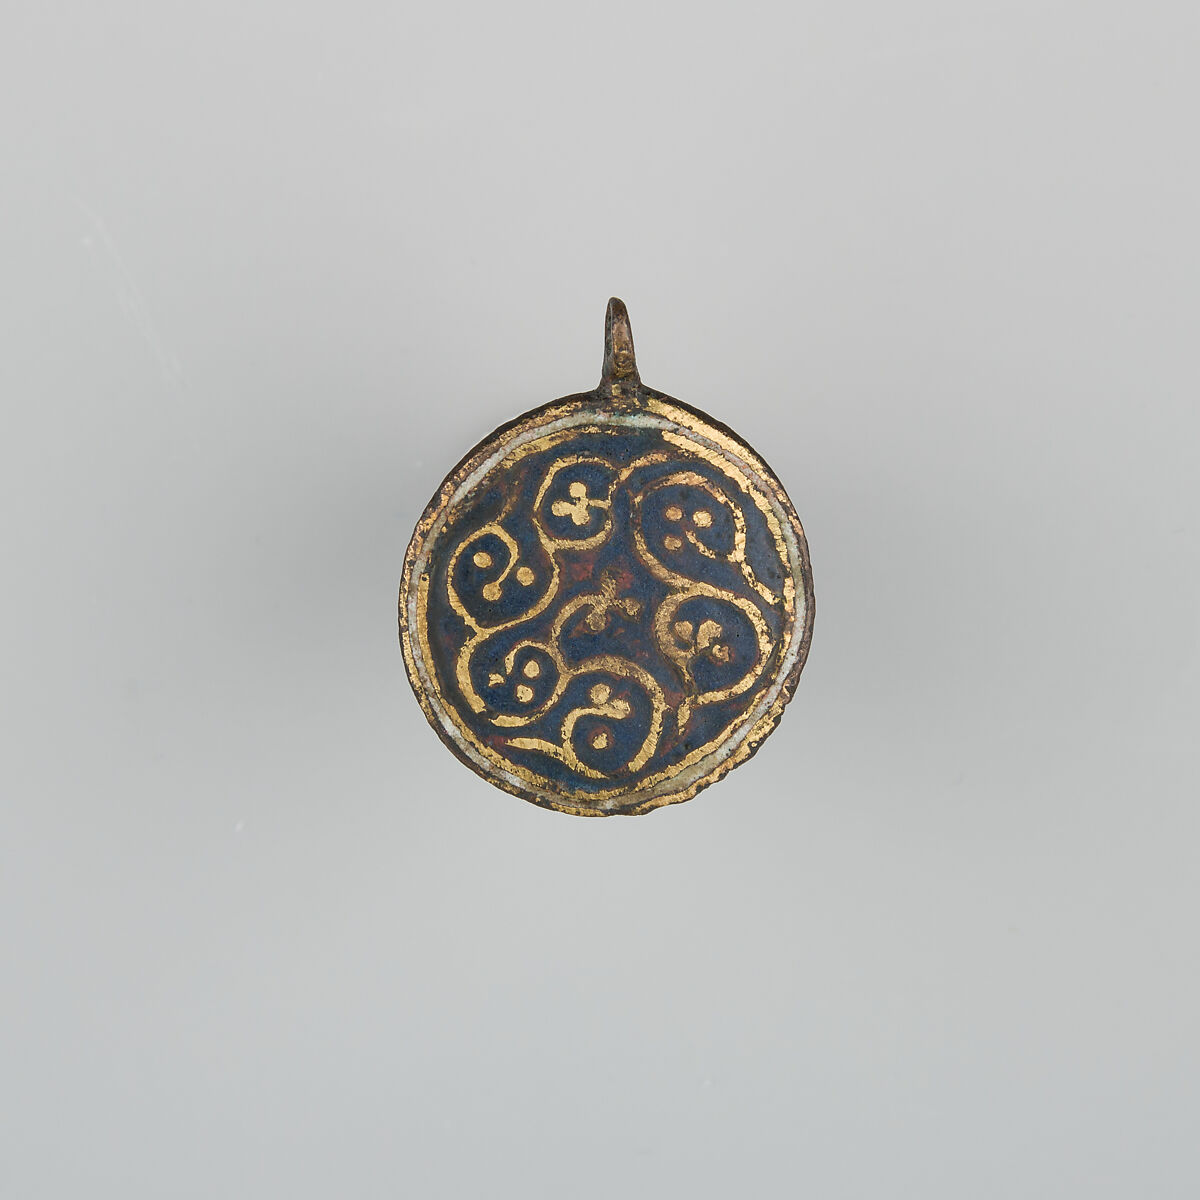 Badge or Harness Pendant, Copper, gold, enamel, possibly Spanish 